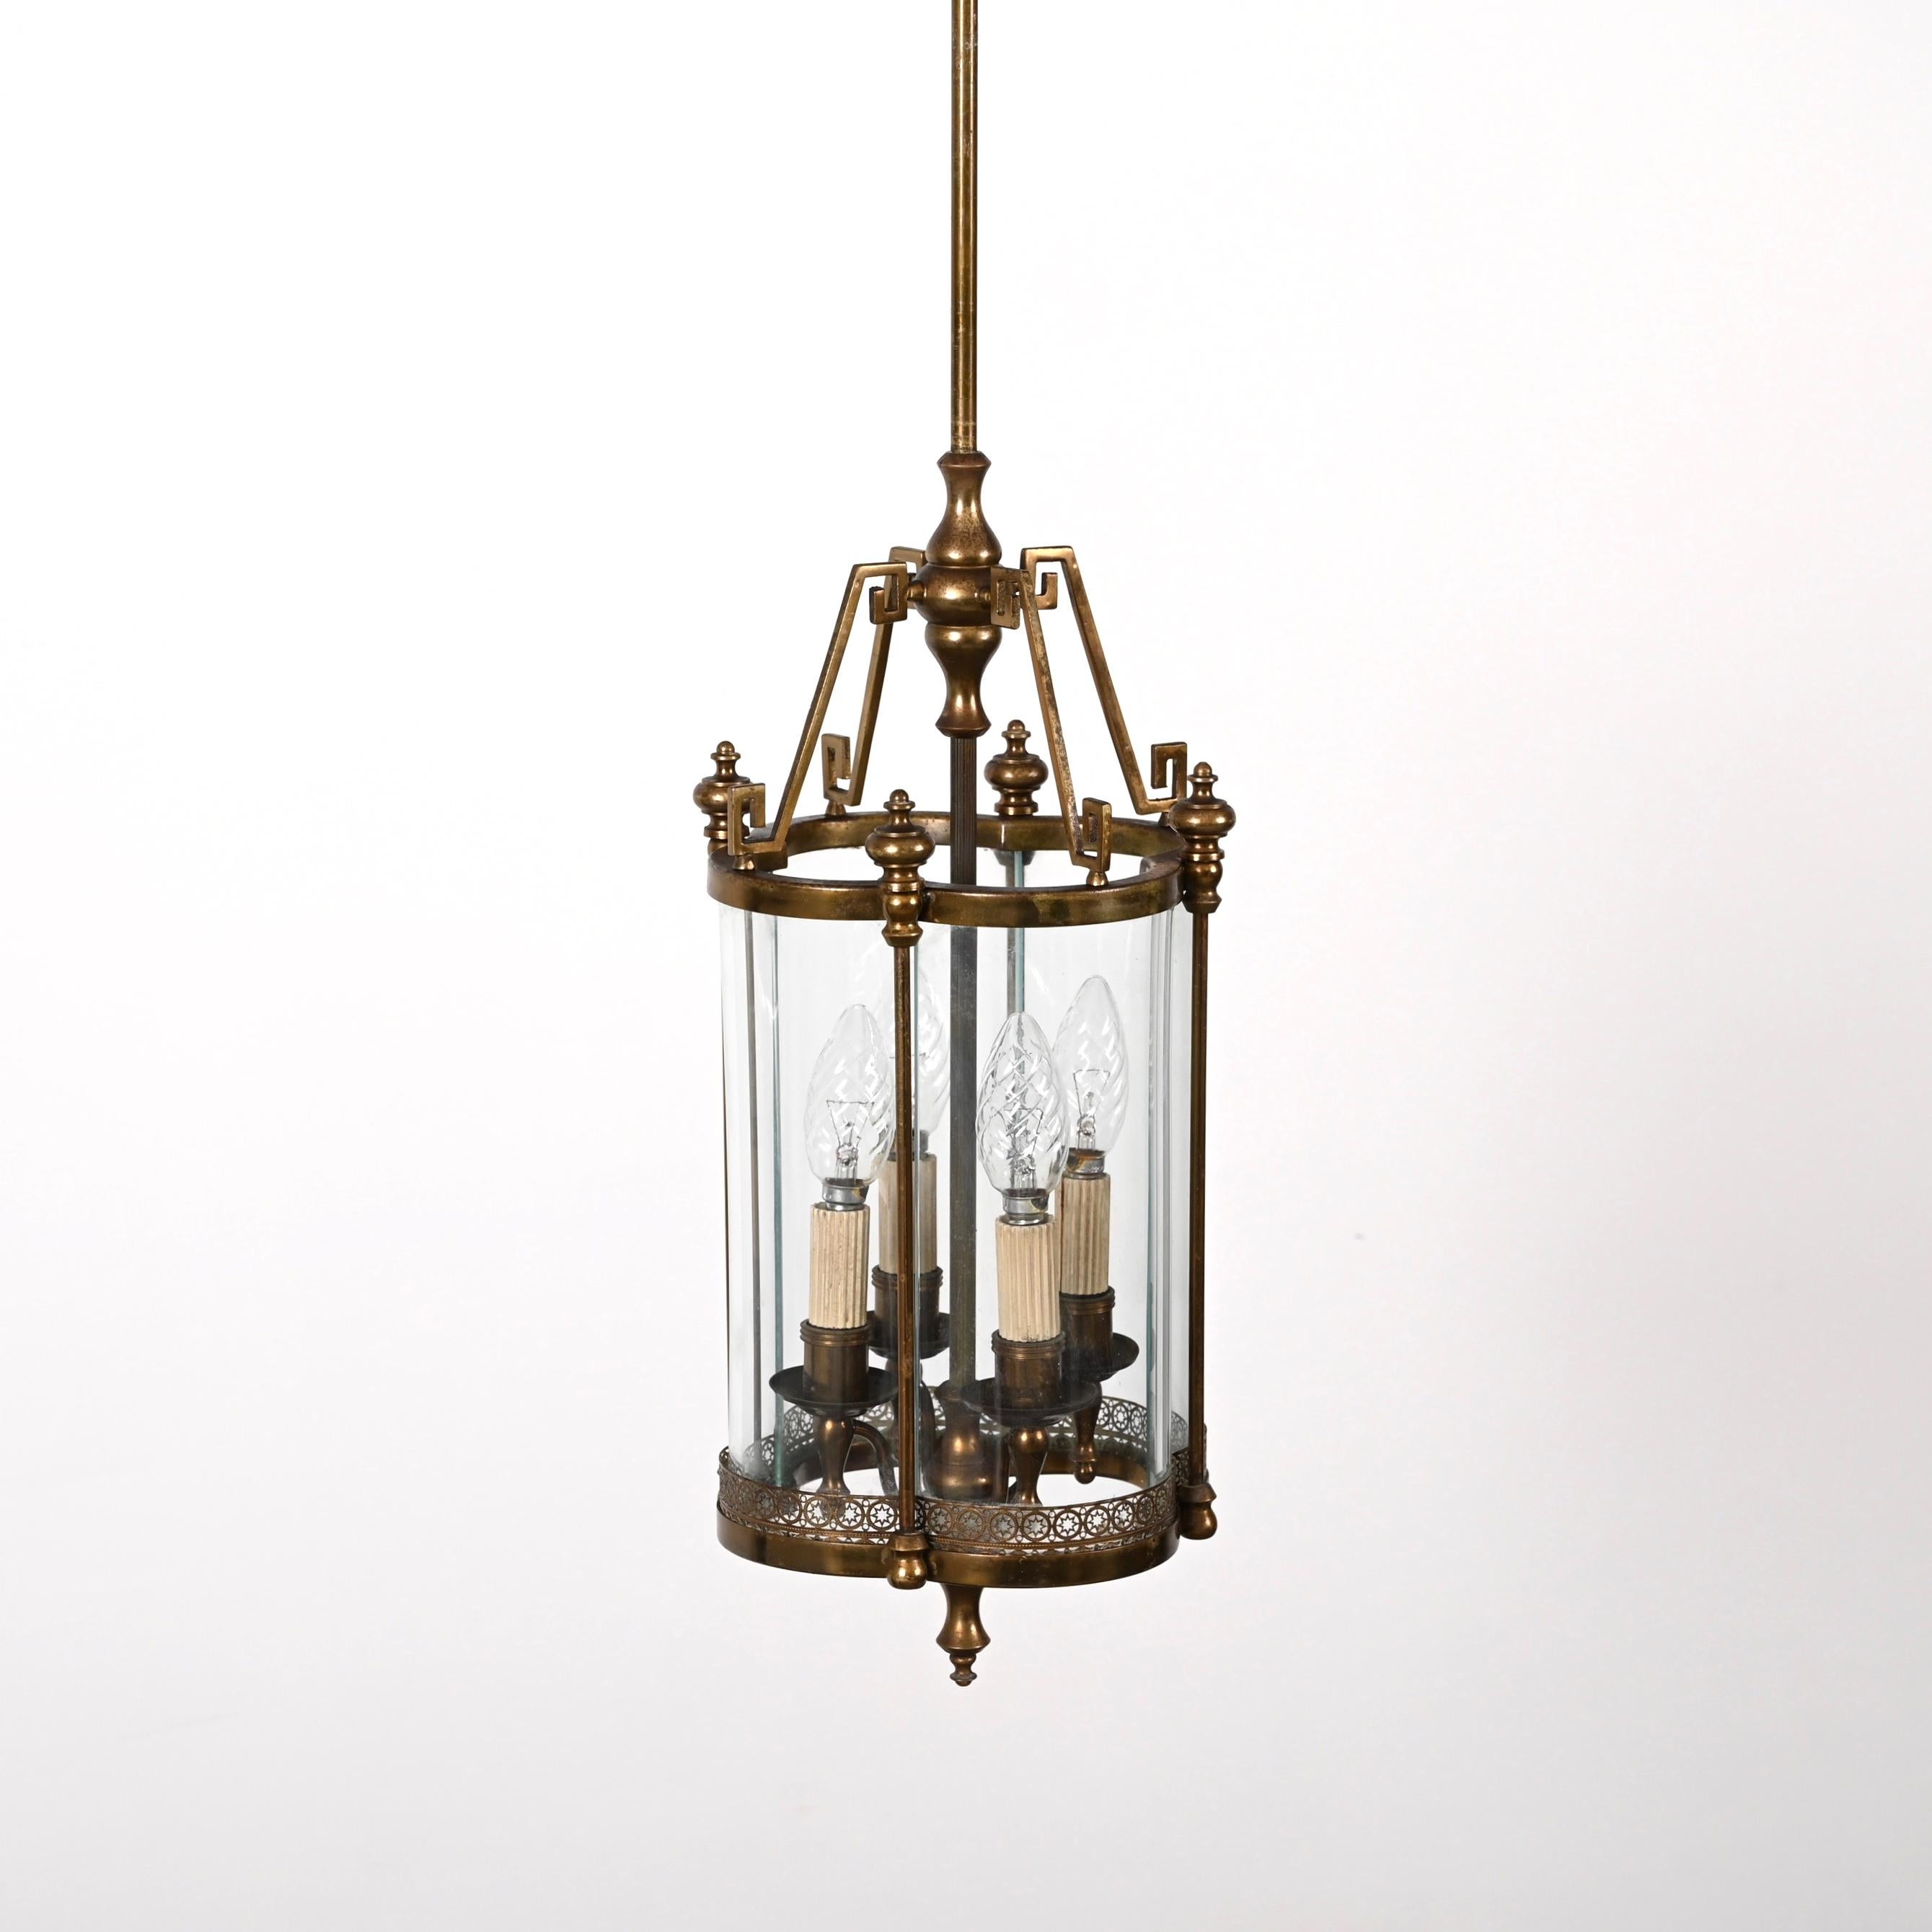 Art Deco Brass and Semicircular Glass Italian Chandelier after Adolf Loos, 1950s For Sale 3